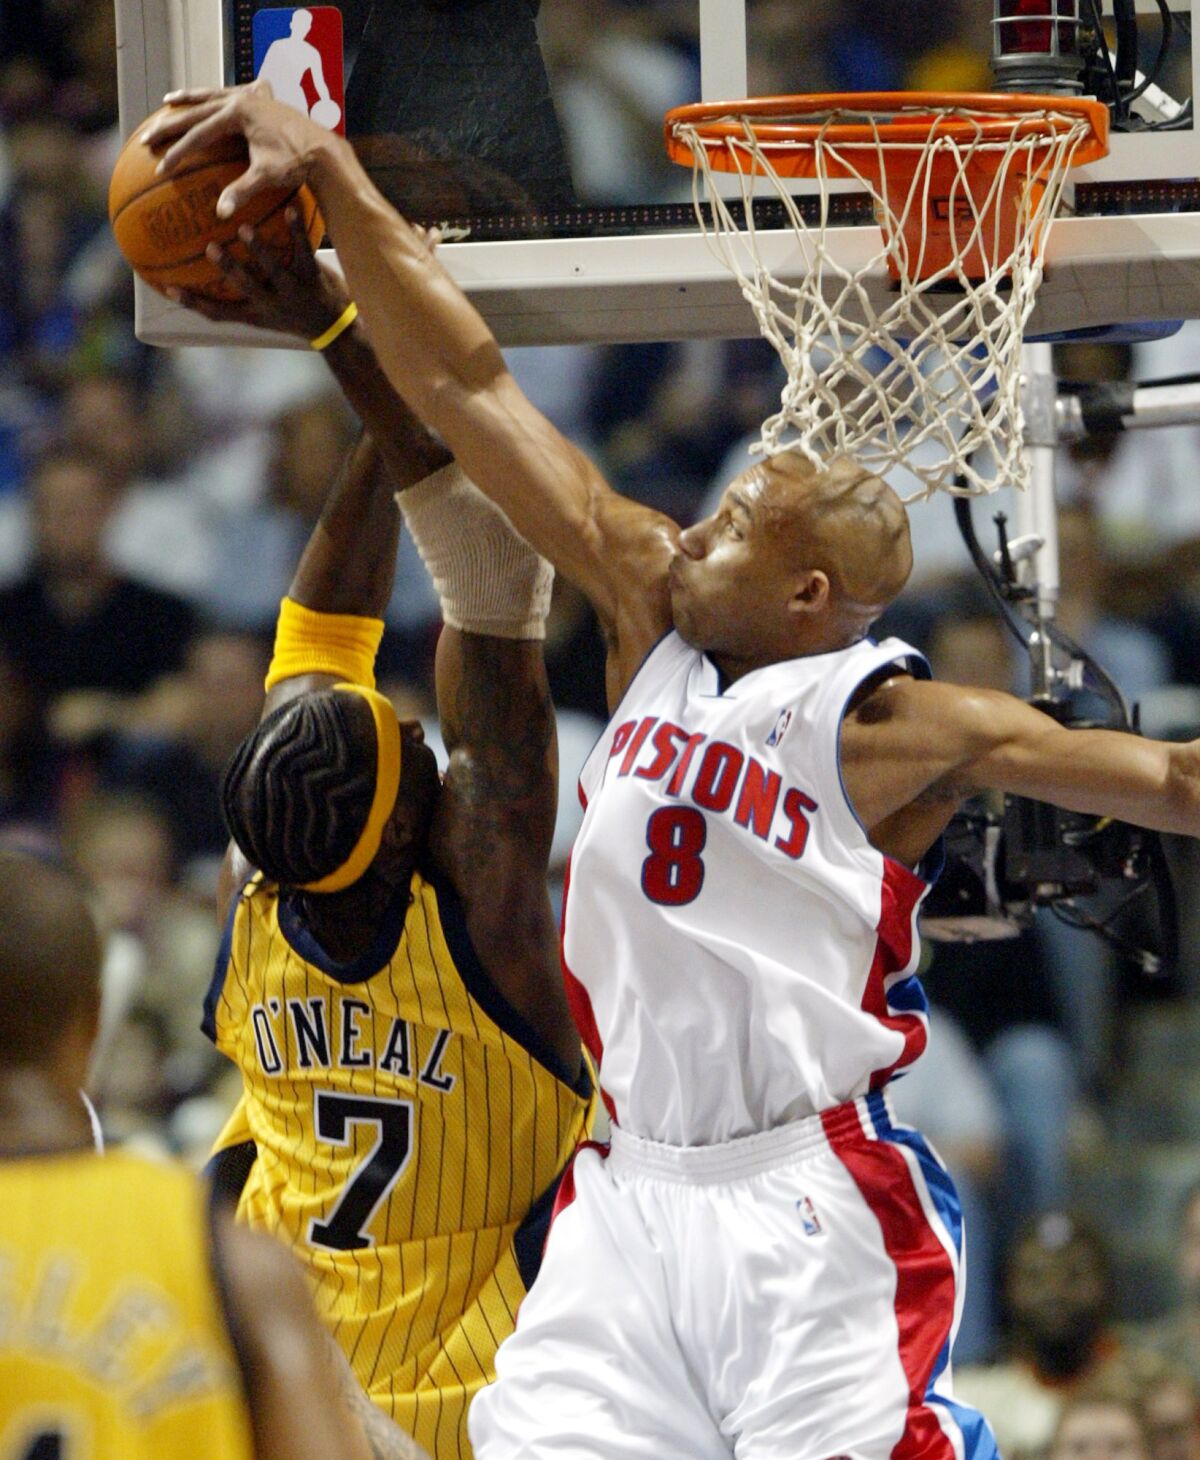 Detroit Pistons forward Darvin Ham blocks a shot by Indiana Pacers forward Jermaine O'Neal.